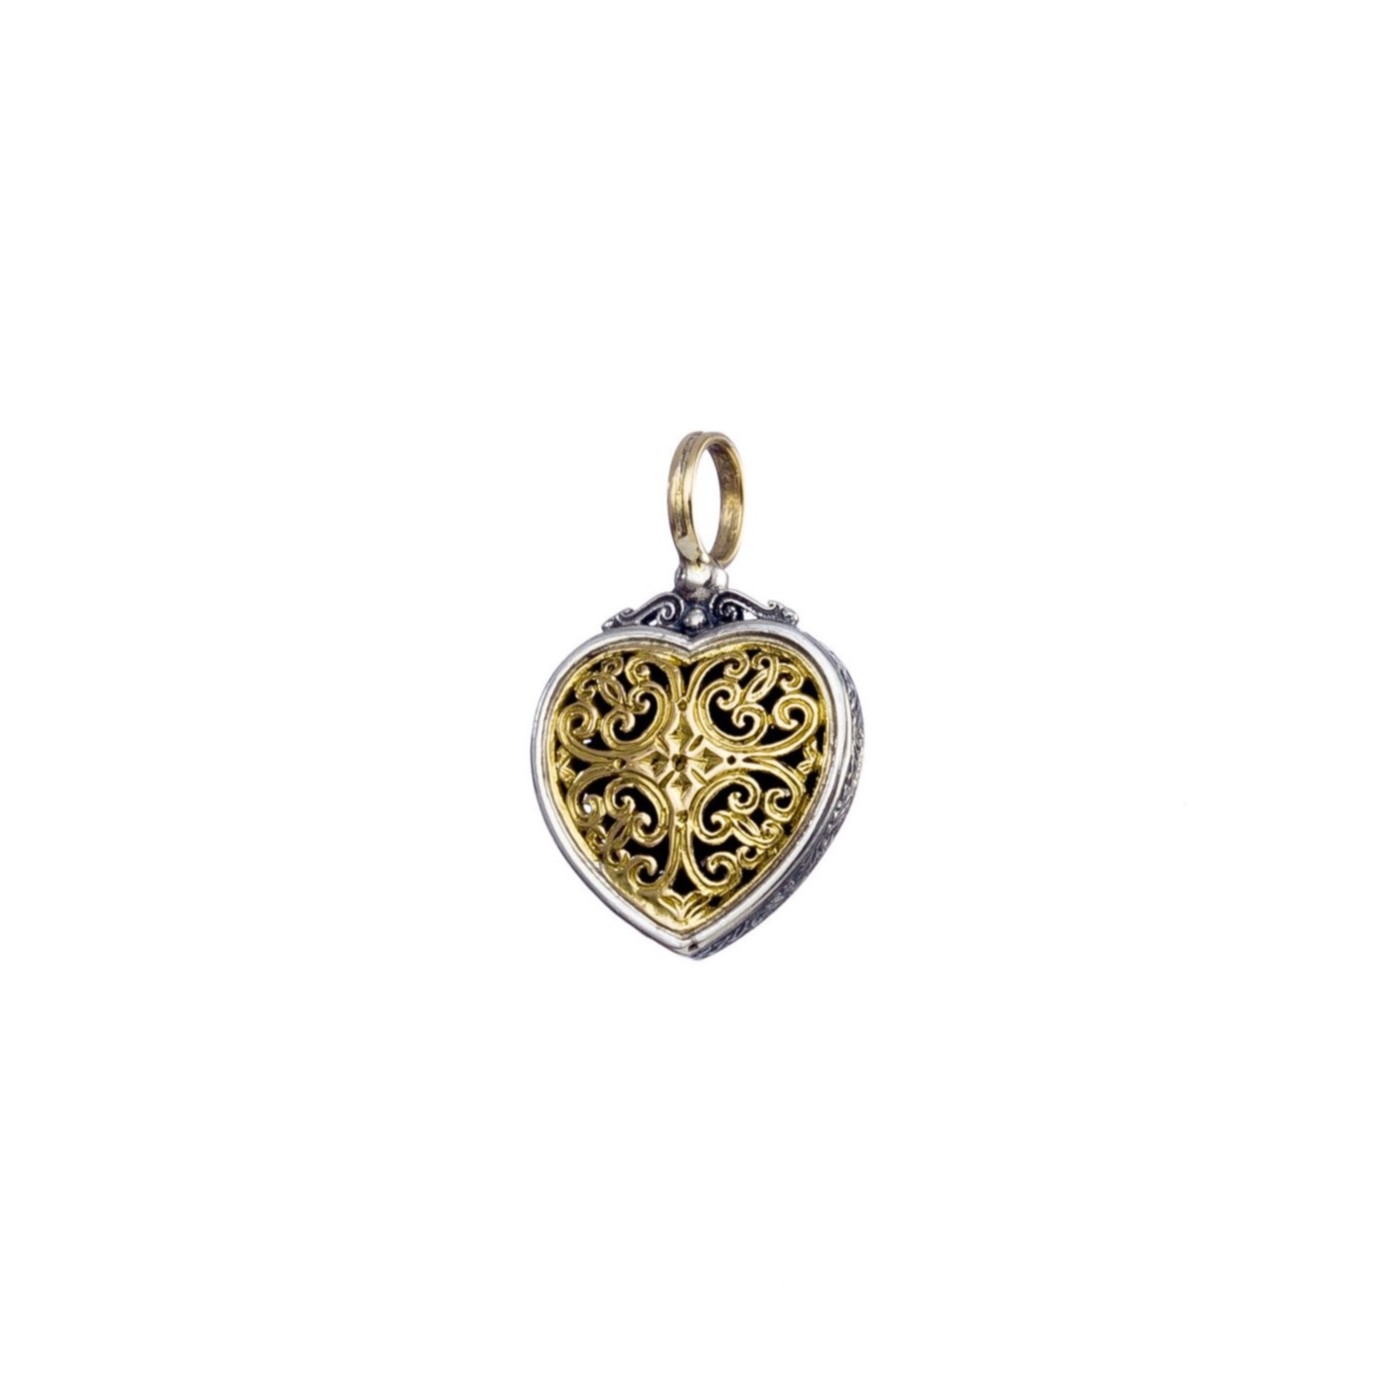 Mediterranean heart pendant in 18K Gold and Sterling silver